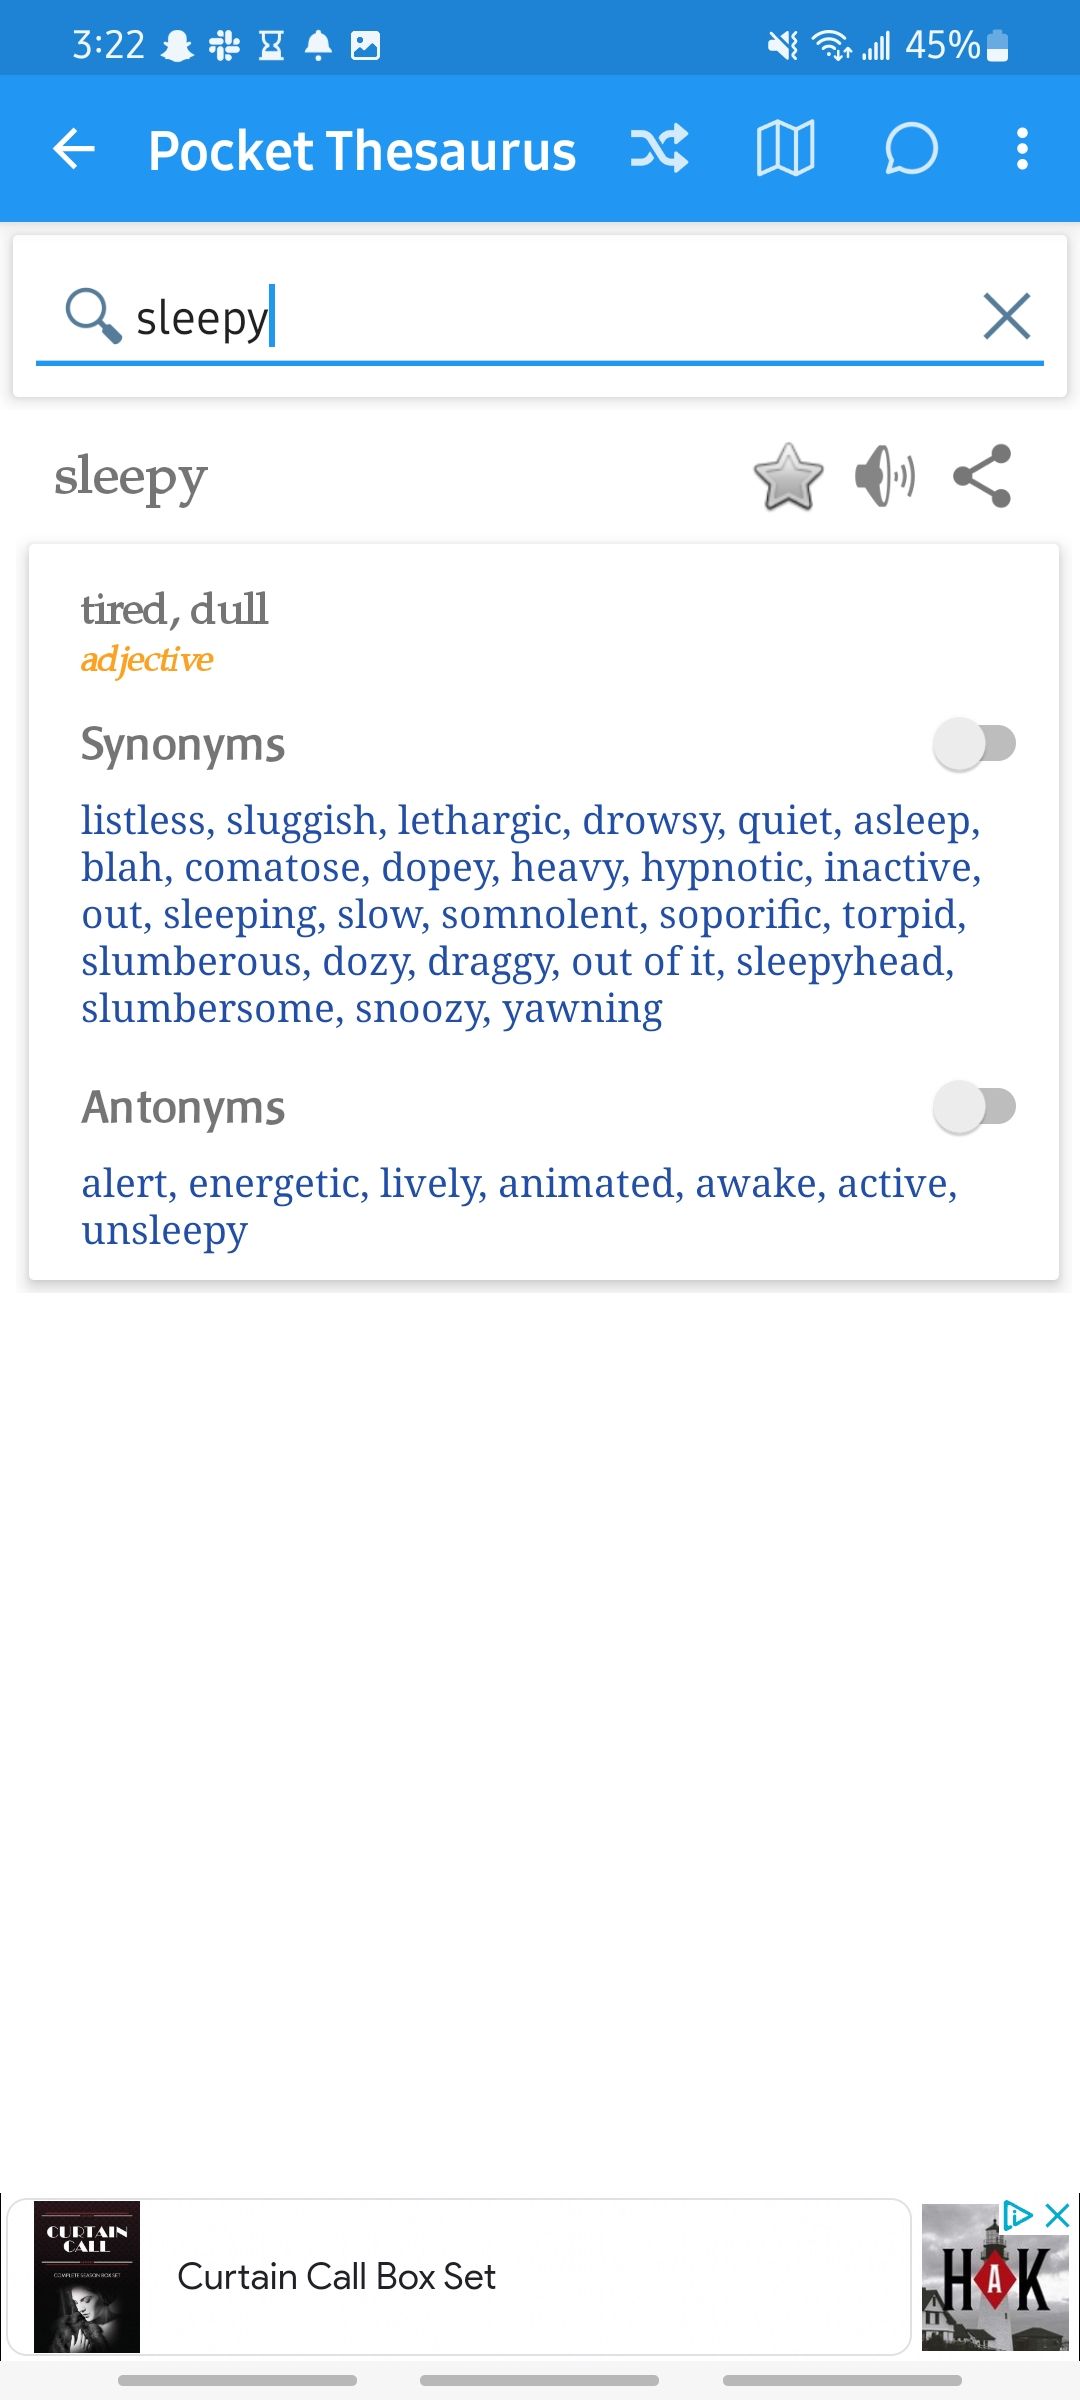 Synonyms and antonyms for the search result sleepy in the Pocket Thesaurus app